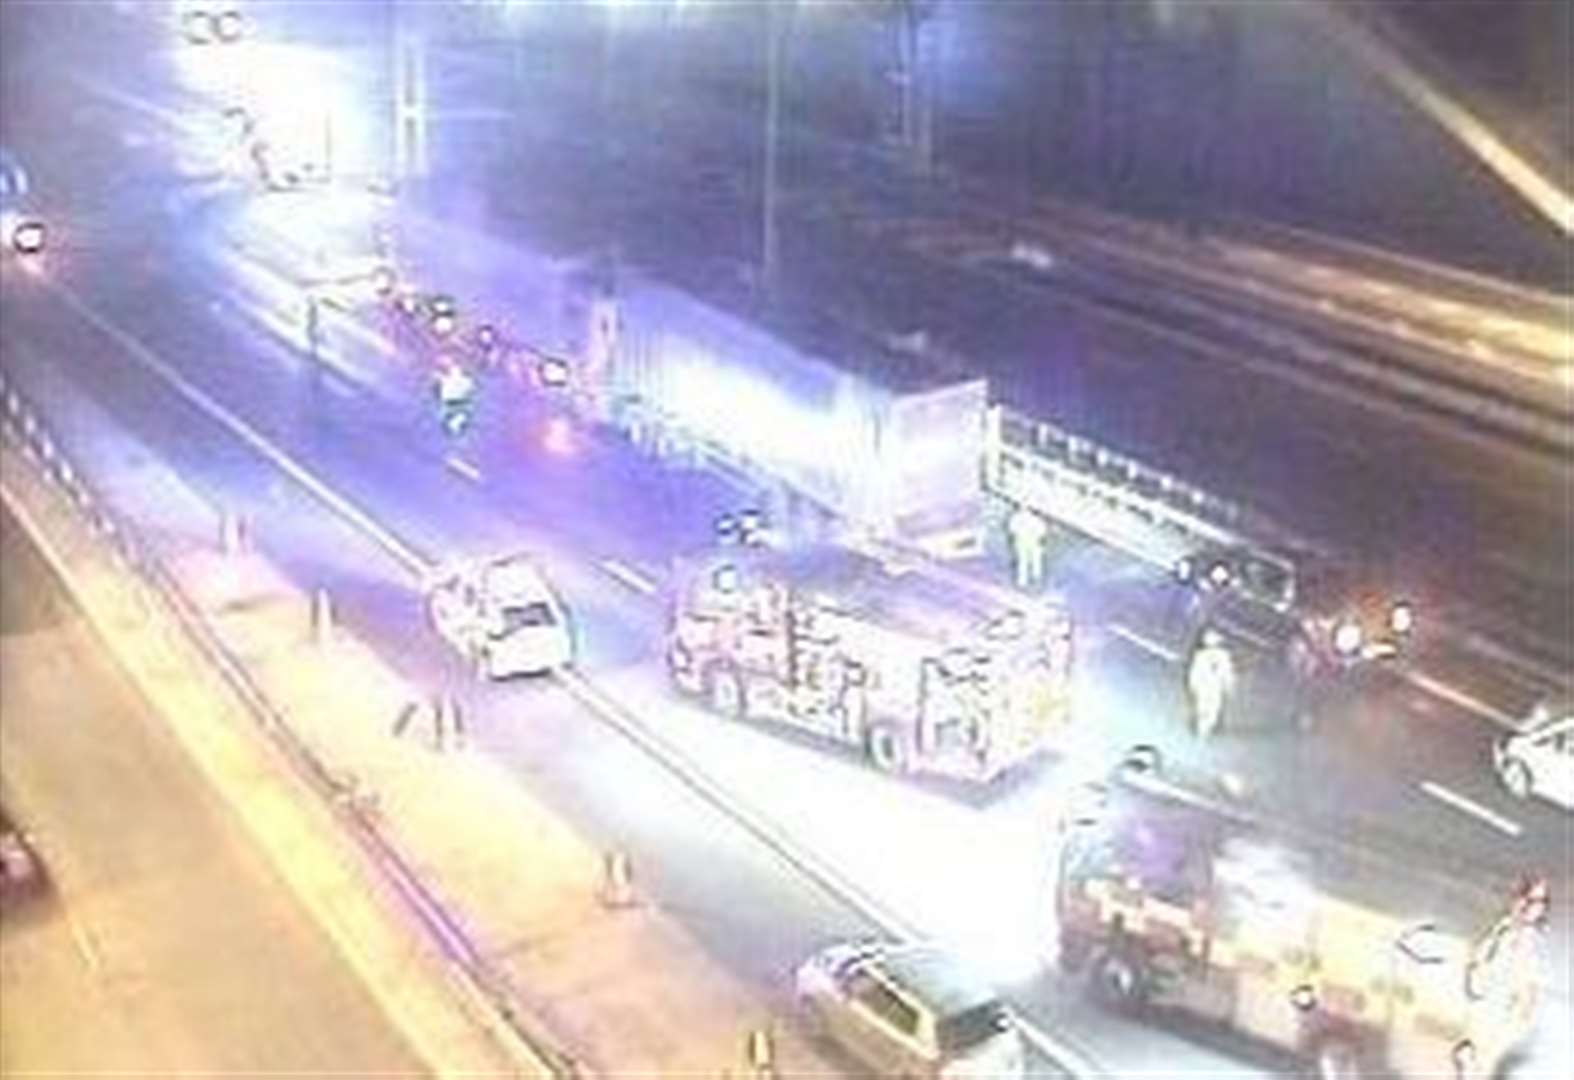 Long delays on M25 cleared after lorry crash